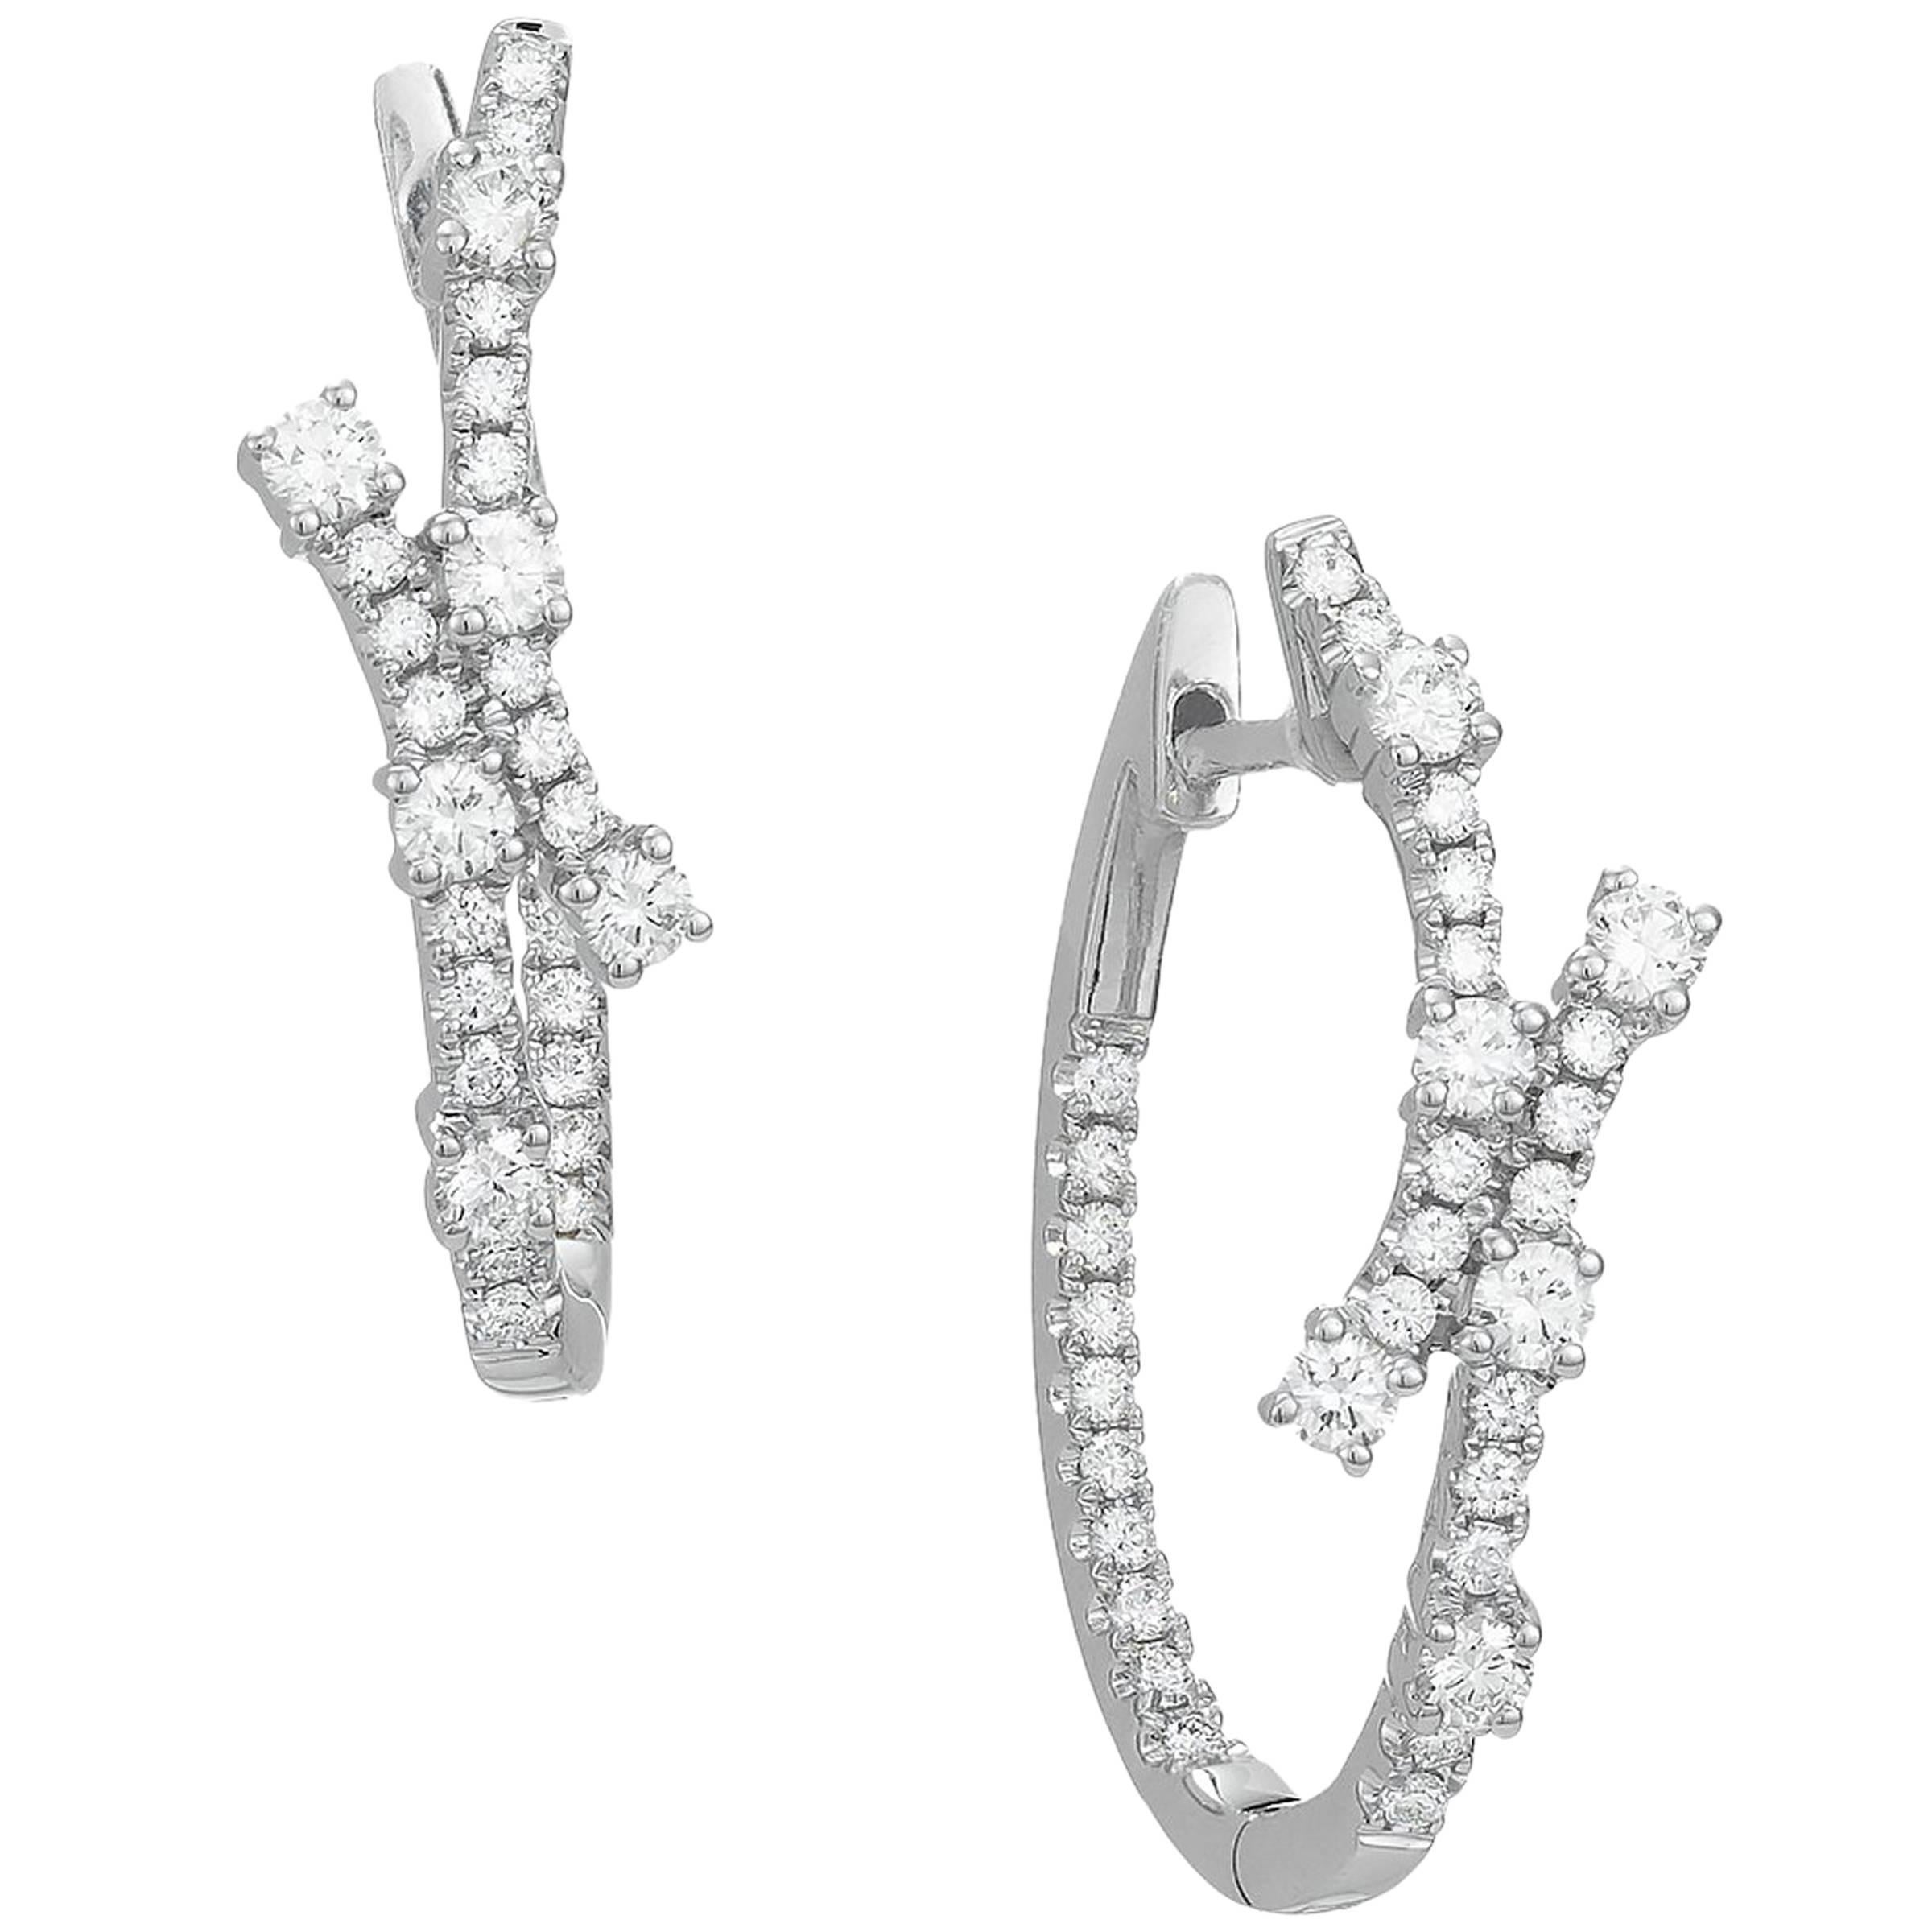 White Gold and Diamond Hoops Star Design